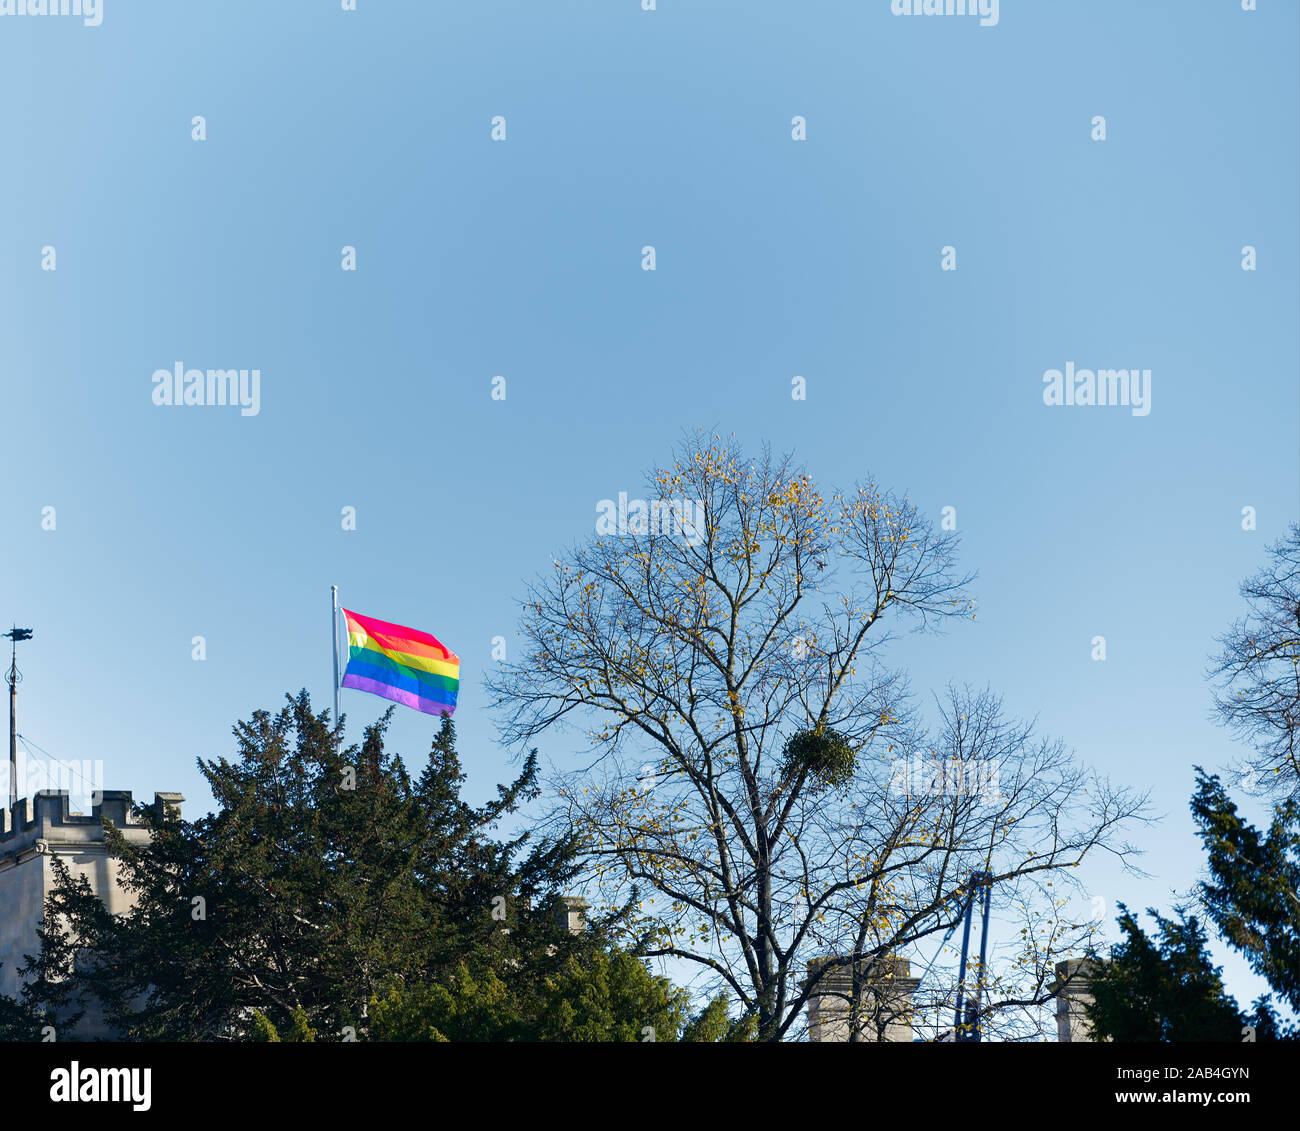 LGBT rainbow flag flying above Wadahm college at the university of Oxford, England, on a sunny winter day. Stock Photo